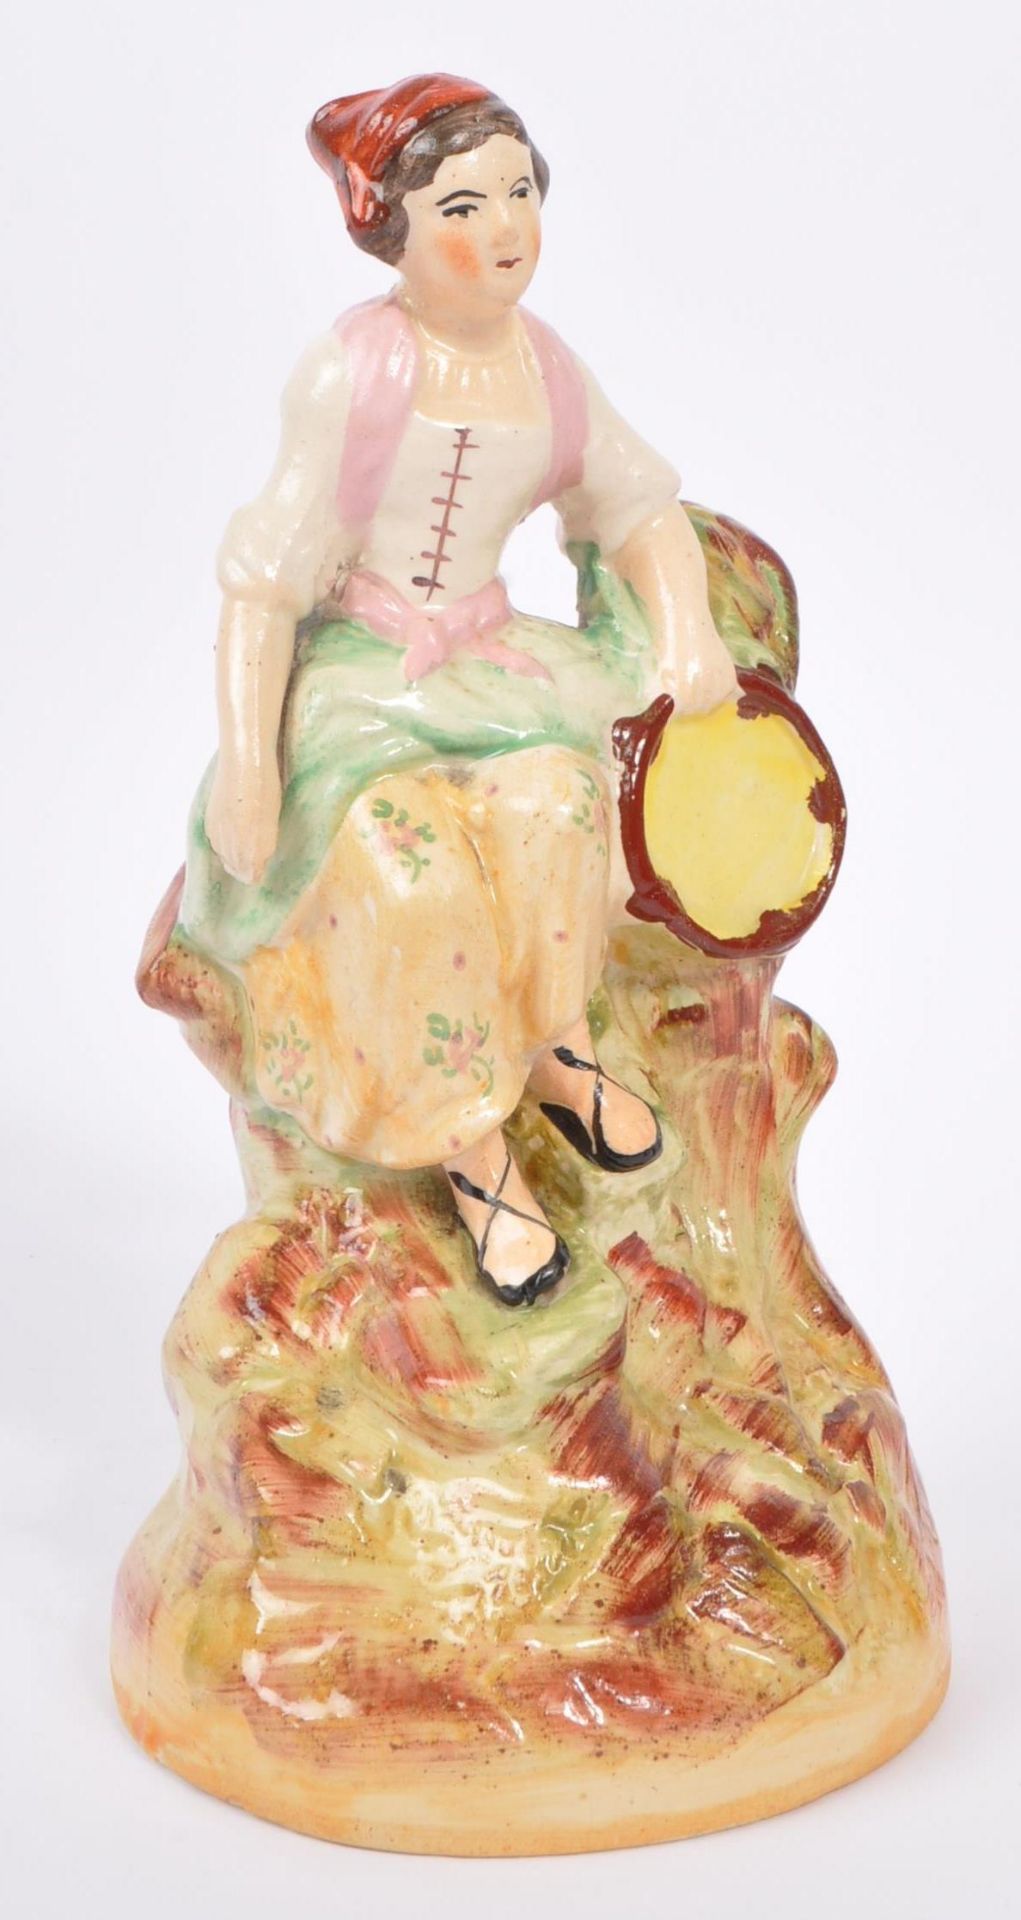 PAIR OF 19TH CENTURY VICTORIAN STAFFORDSHIRE FIGURES - Image 4 of 4